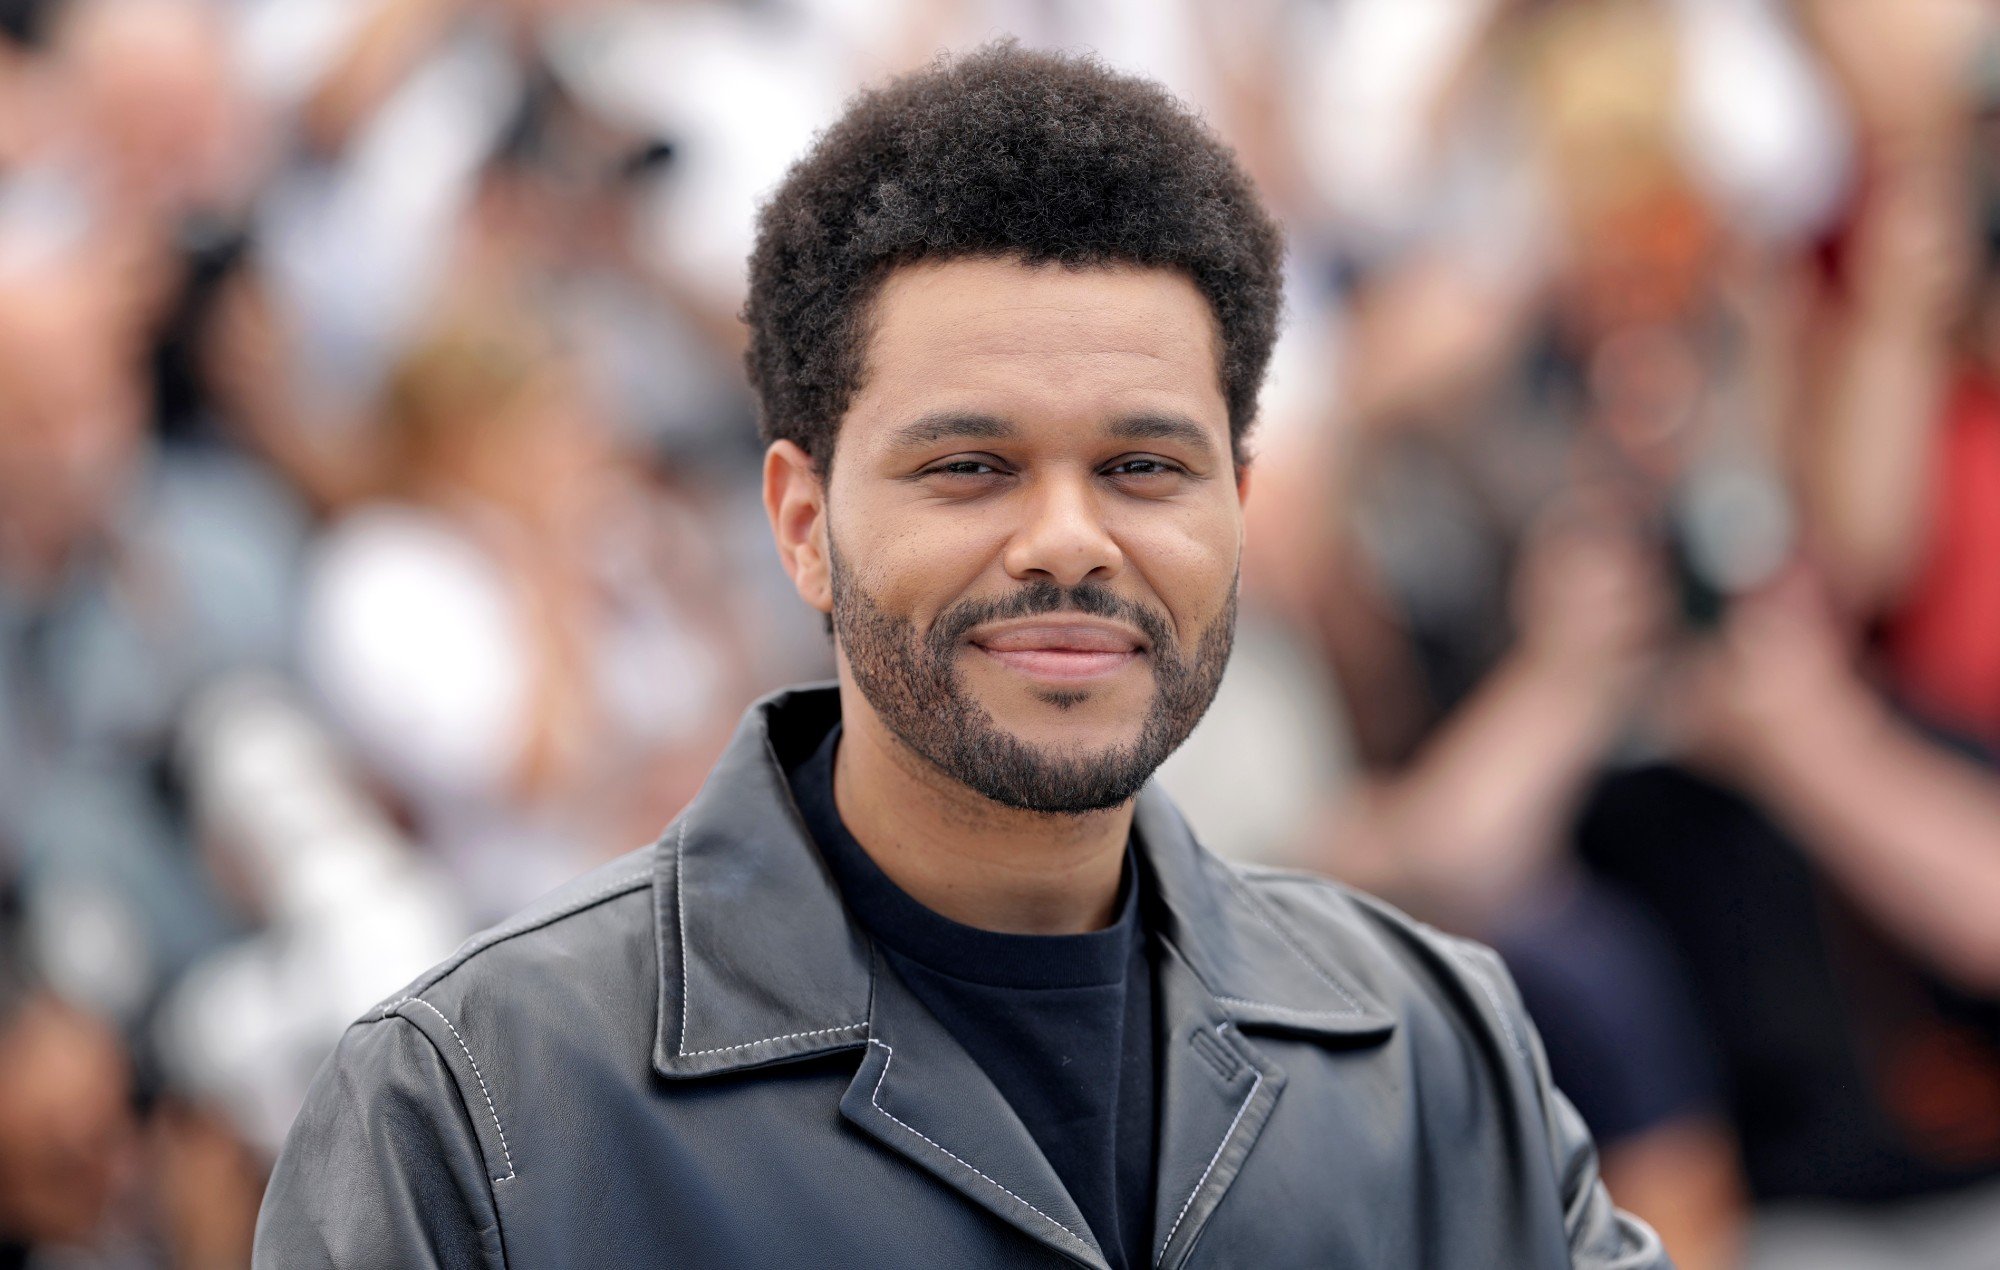 The Weeknd shares snippet of new music in cinematic teaser